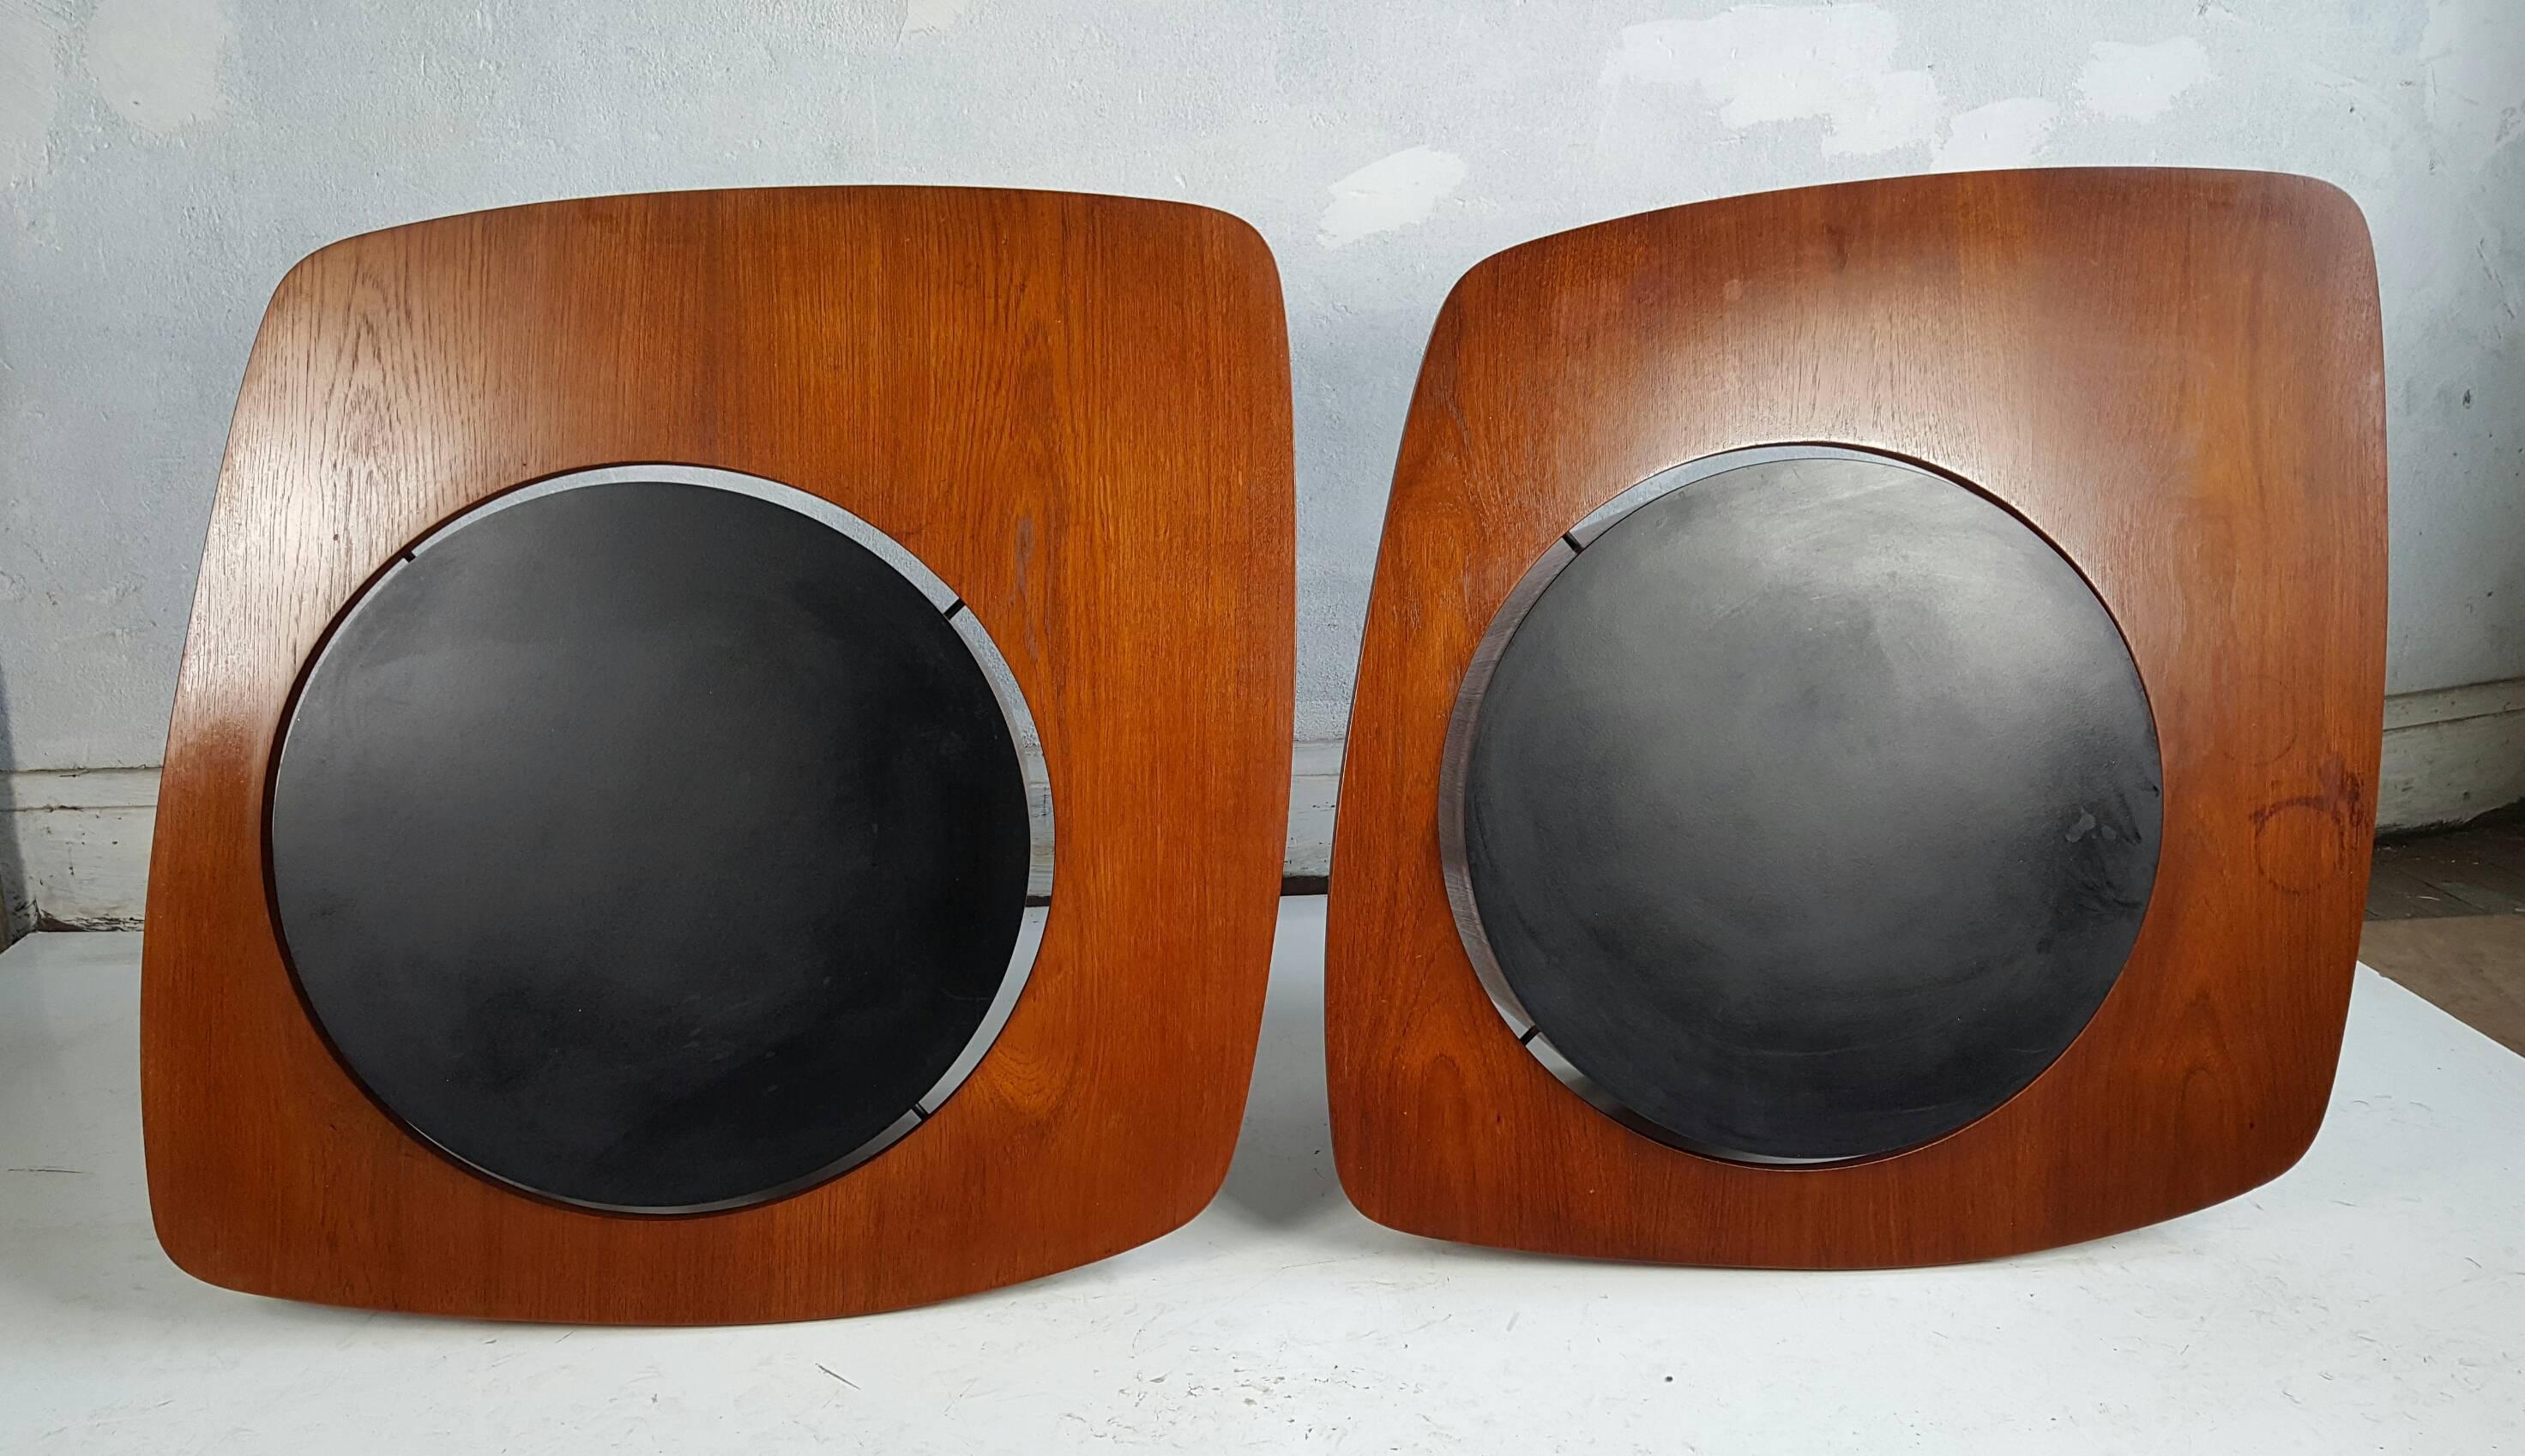 Canadian Rare Oversized Teak Expo 67 Pair of Cocktail Tables by RS Associates